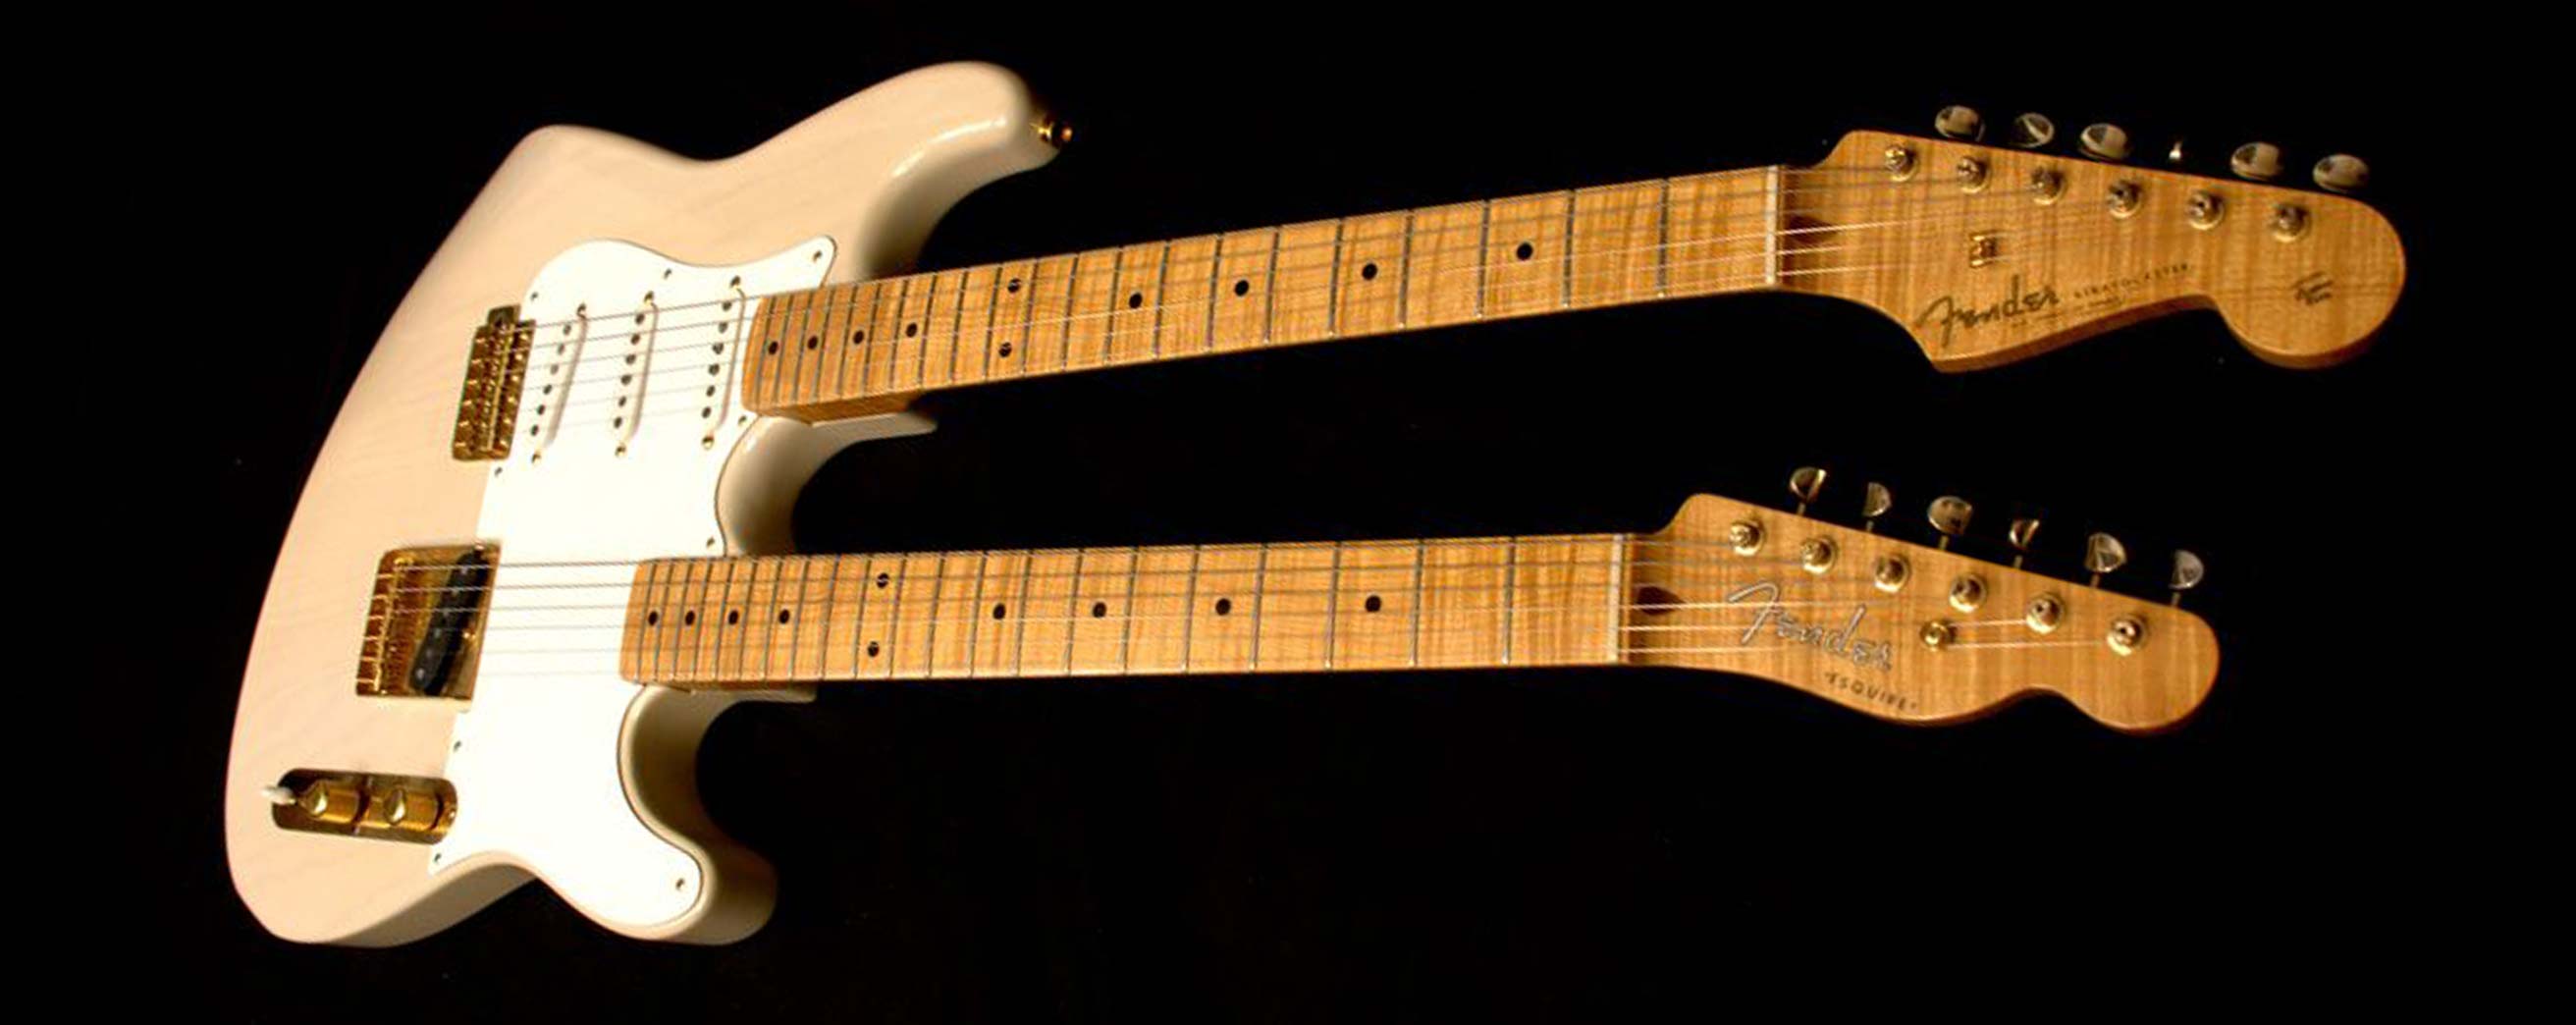 Original Master Builder Michael Stevens' unique Stratocaster/Esquire is widely known to be the Custom Shop's first build.